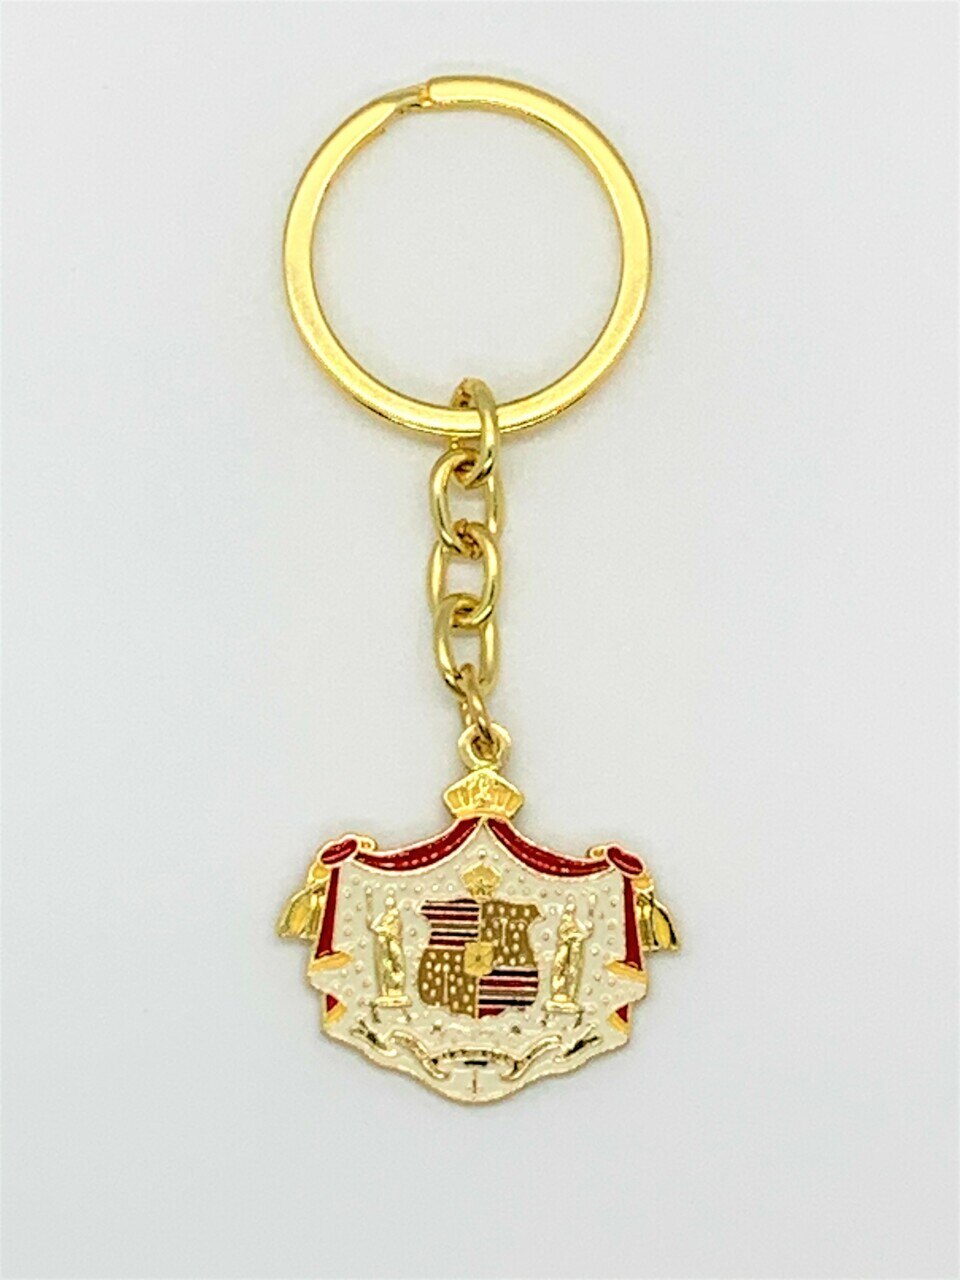 Coat of Arms Keychain